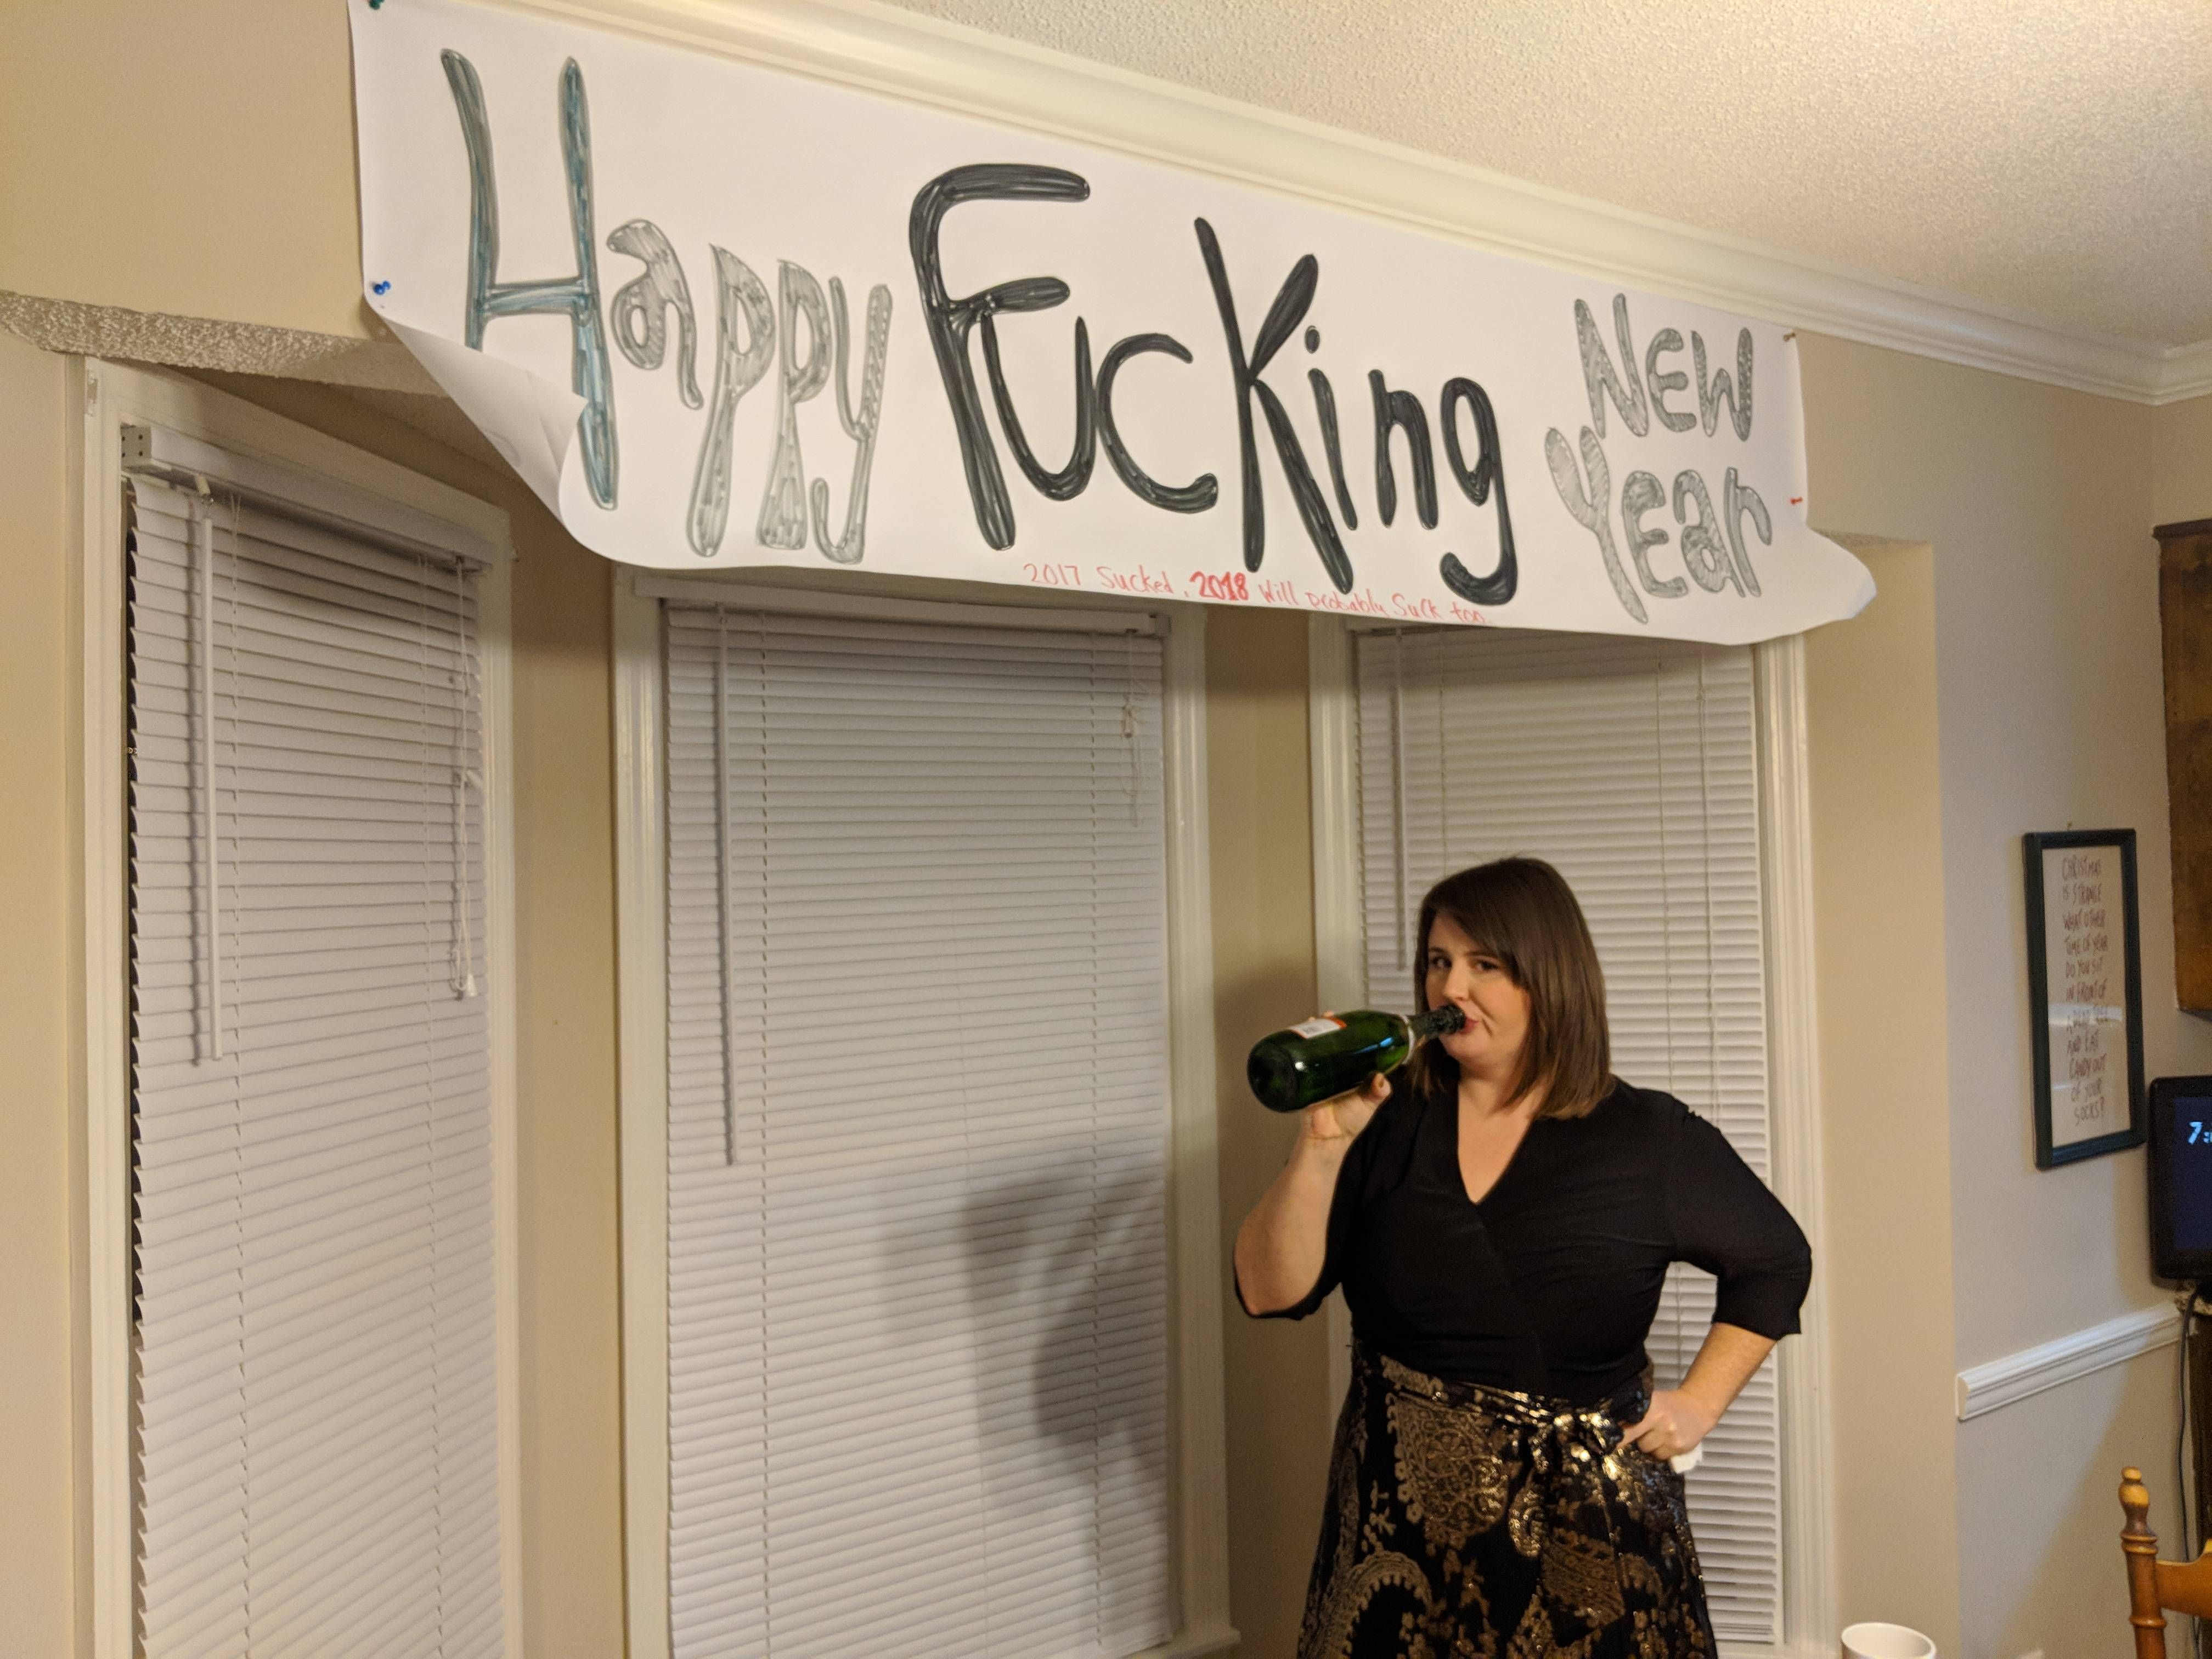 No one showed up for my wife's New Year's Eve party ☹️ so she made a sign.